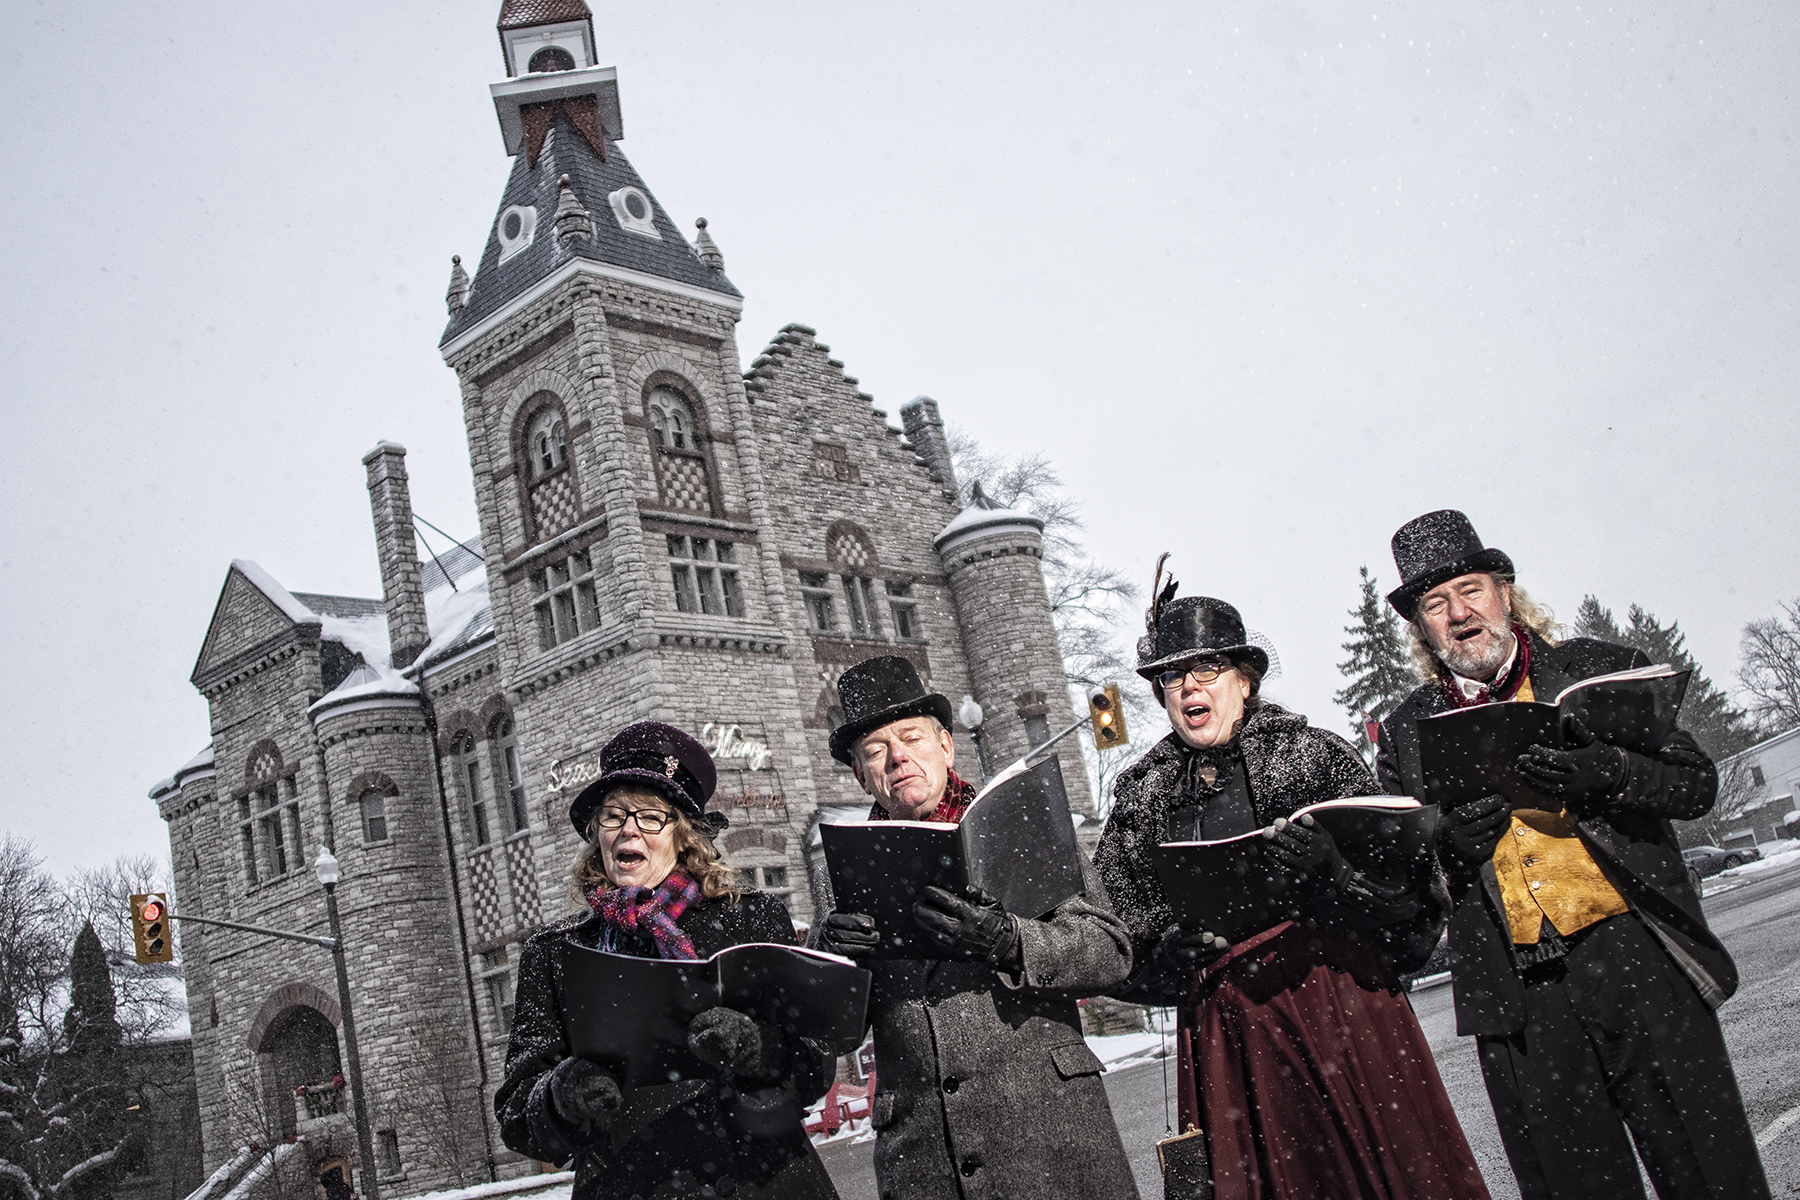 Carolers singing putside in the snow in fron of Twn Hall